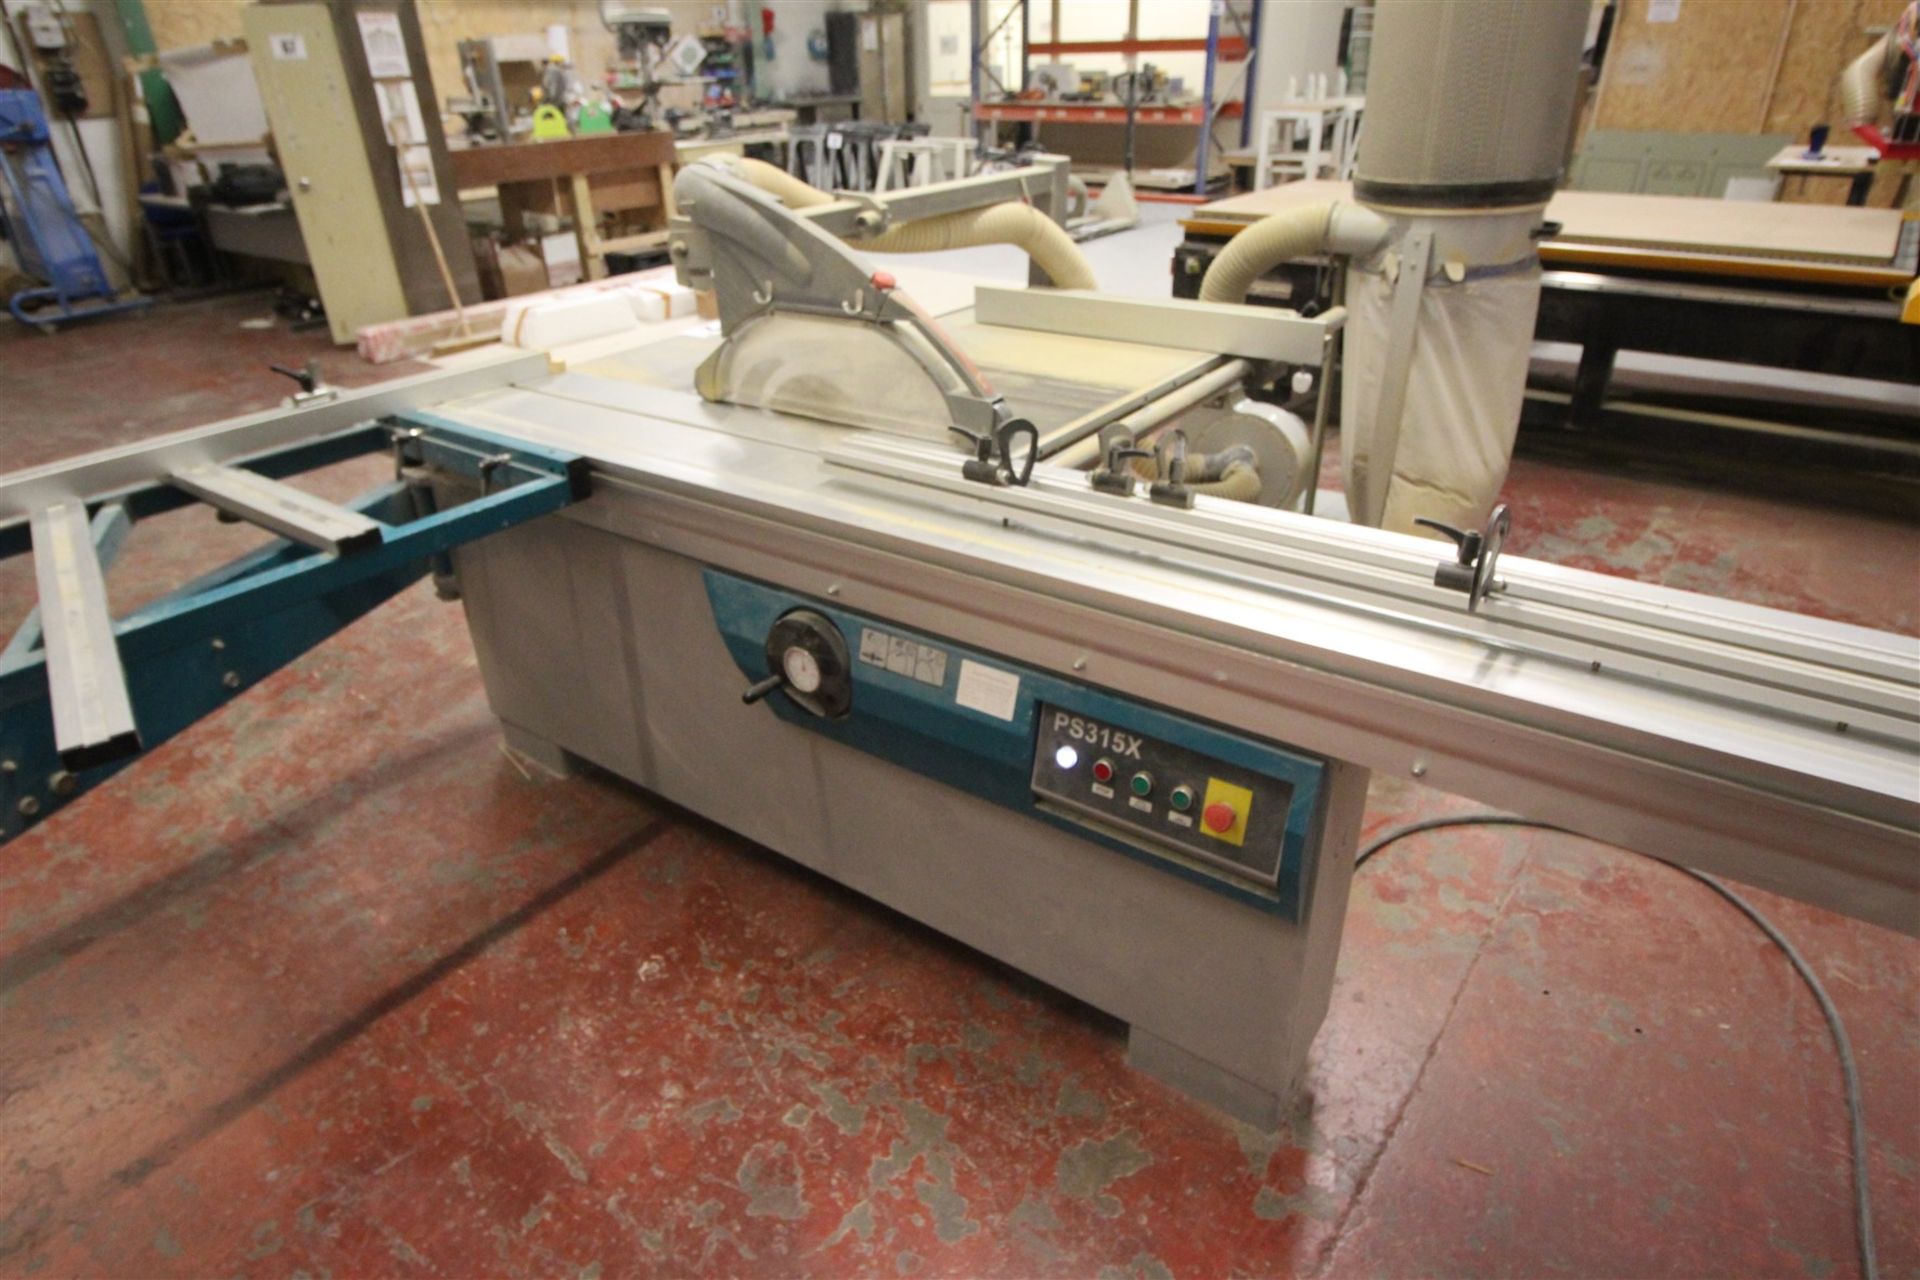 SLIDING TABLE DIMENSION SAW WITH TILT BLADE FACILITY, MODEL NO. PS315X, MAIN BLADE DIAMETER 315MM, - Image 2 of 3